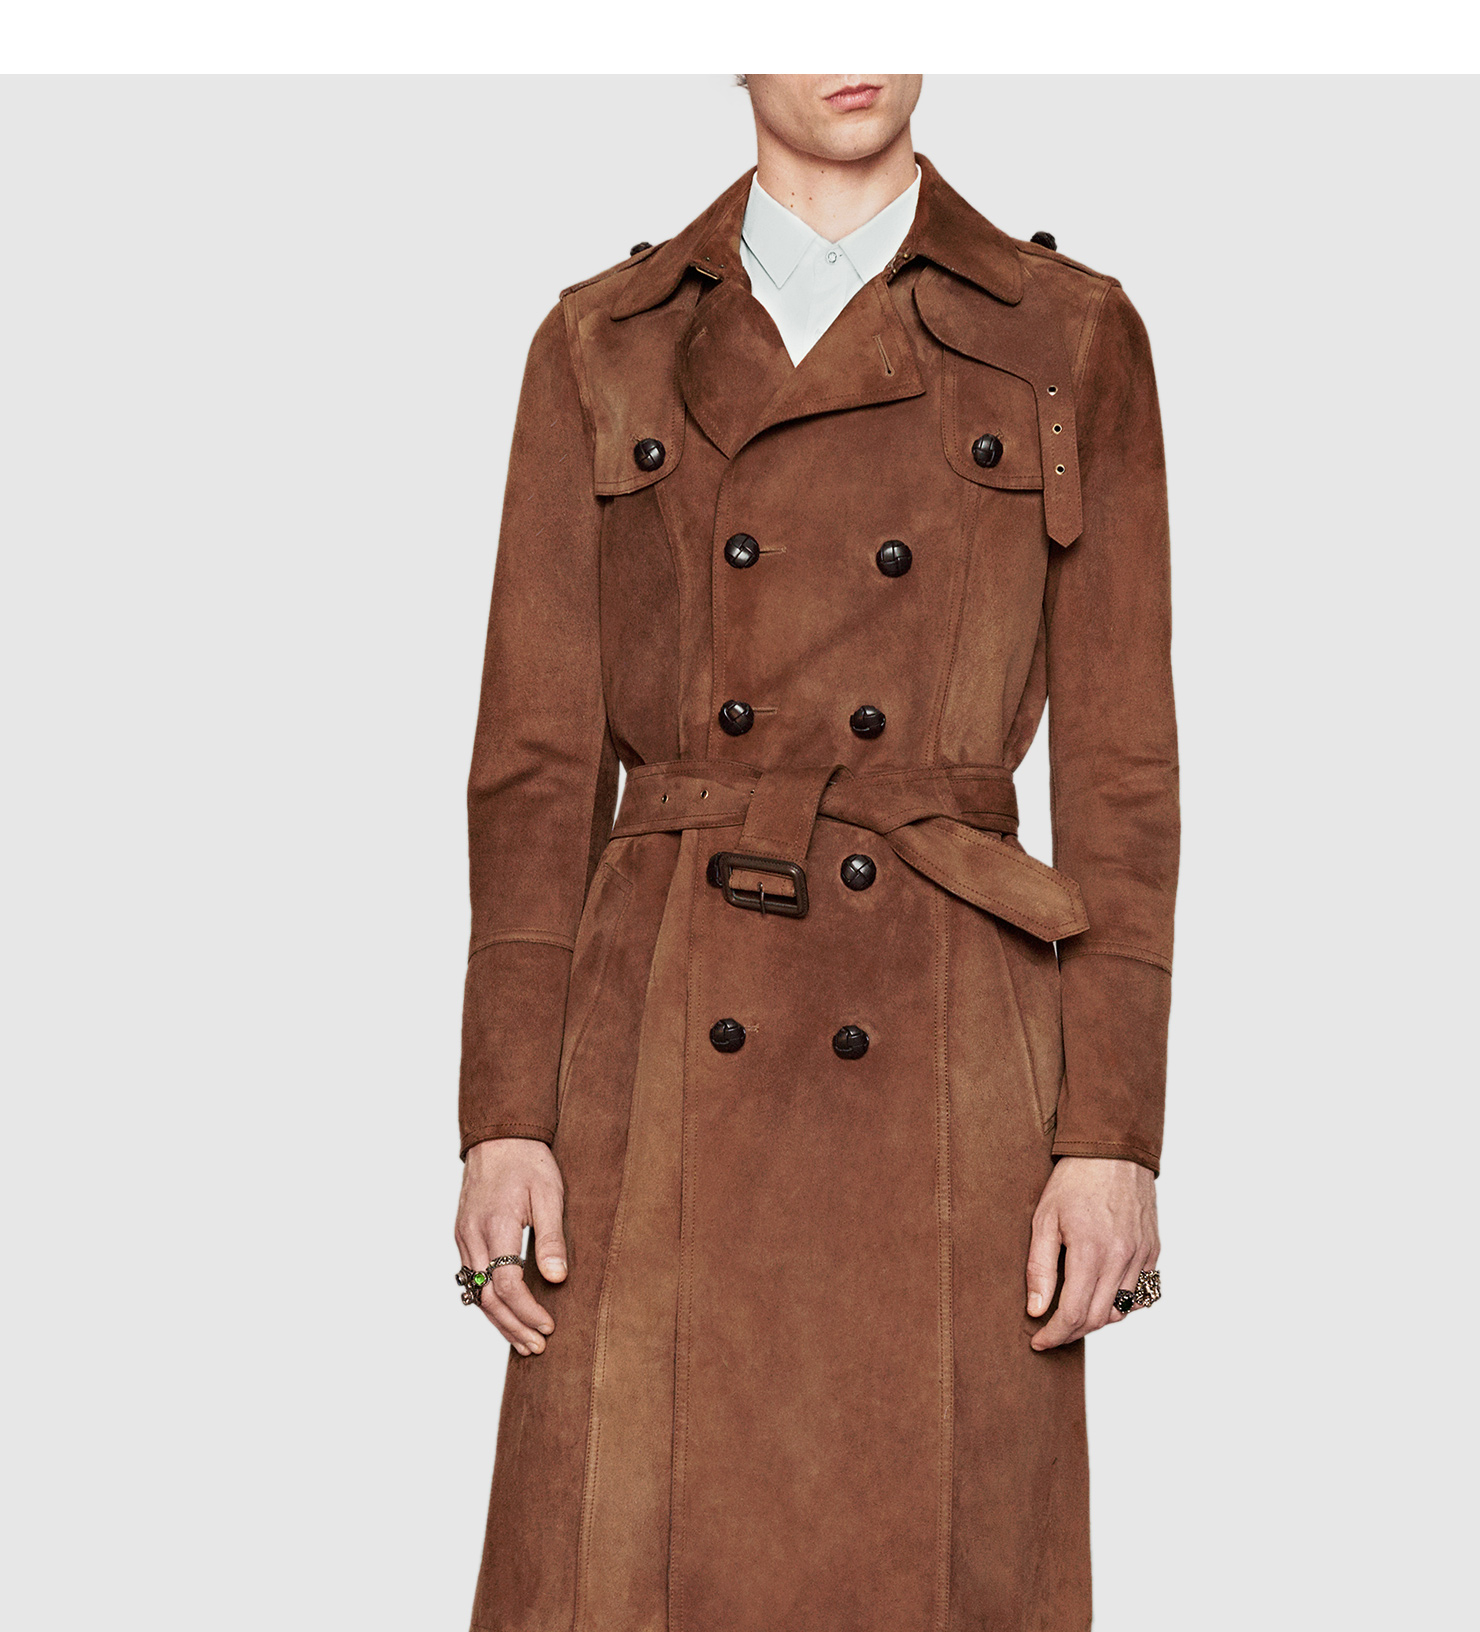 Gucci Suede Trench Coat in Brown for Men - Lyst